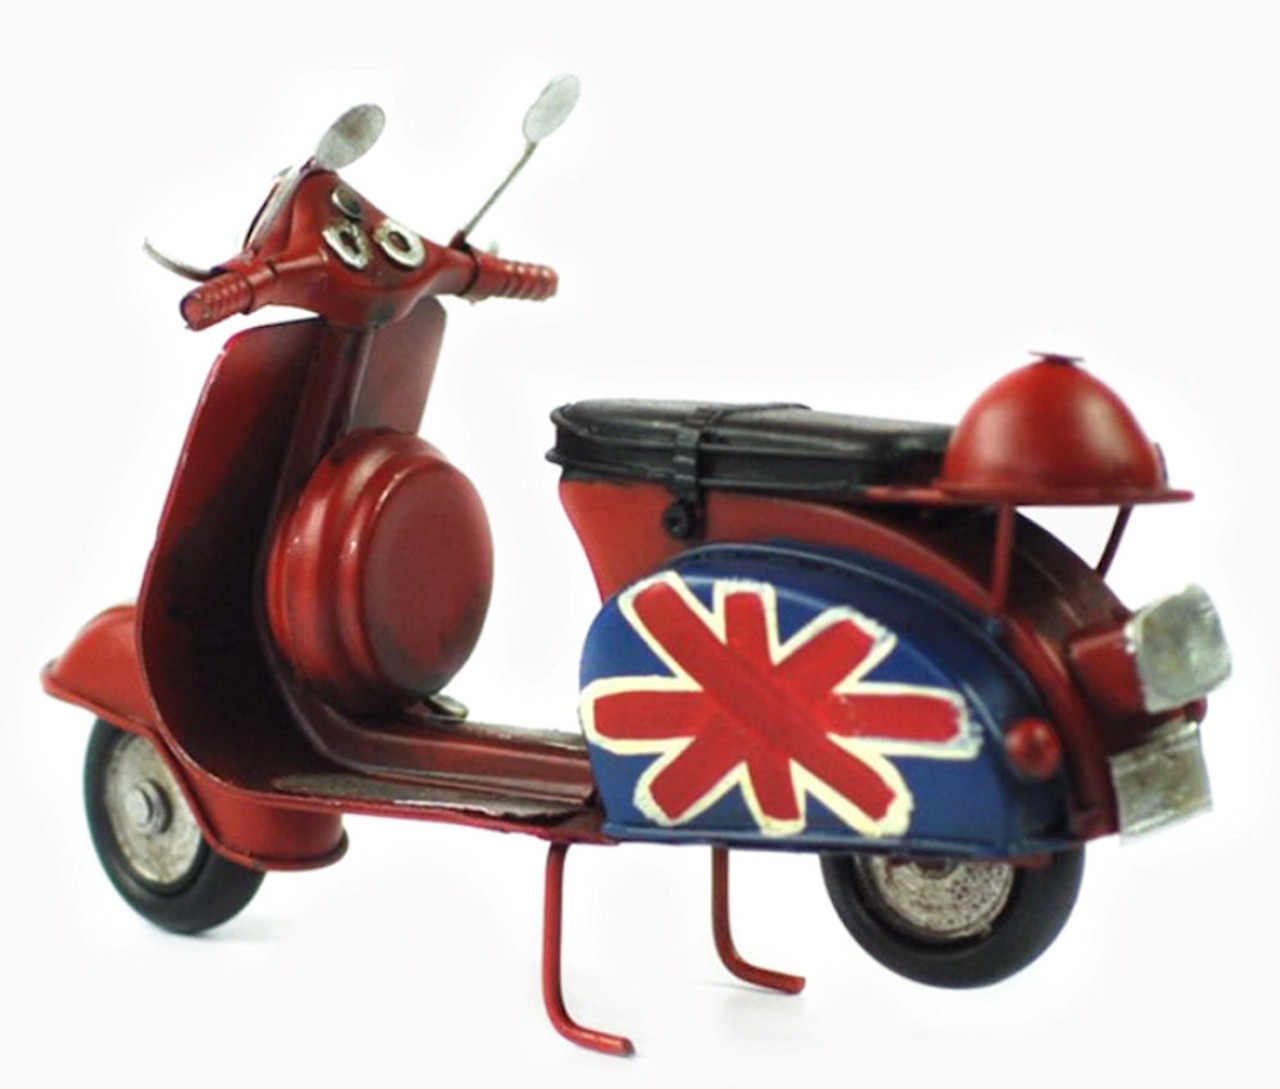 Vintage Metal Crafts Motorcycle (Red) - Orchid Supply Store